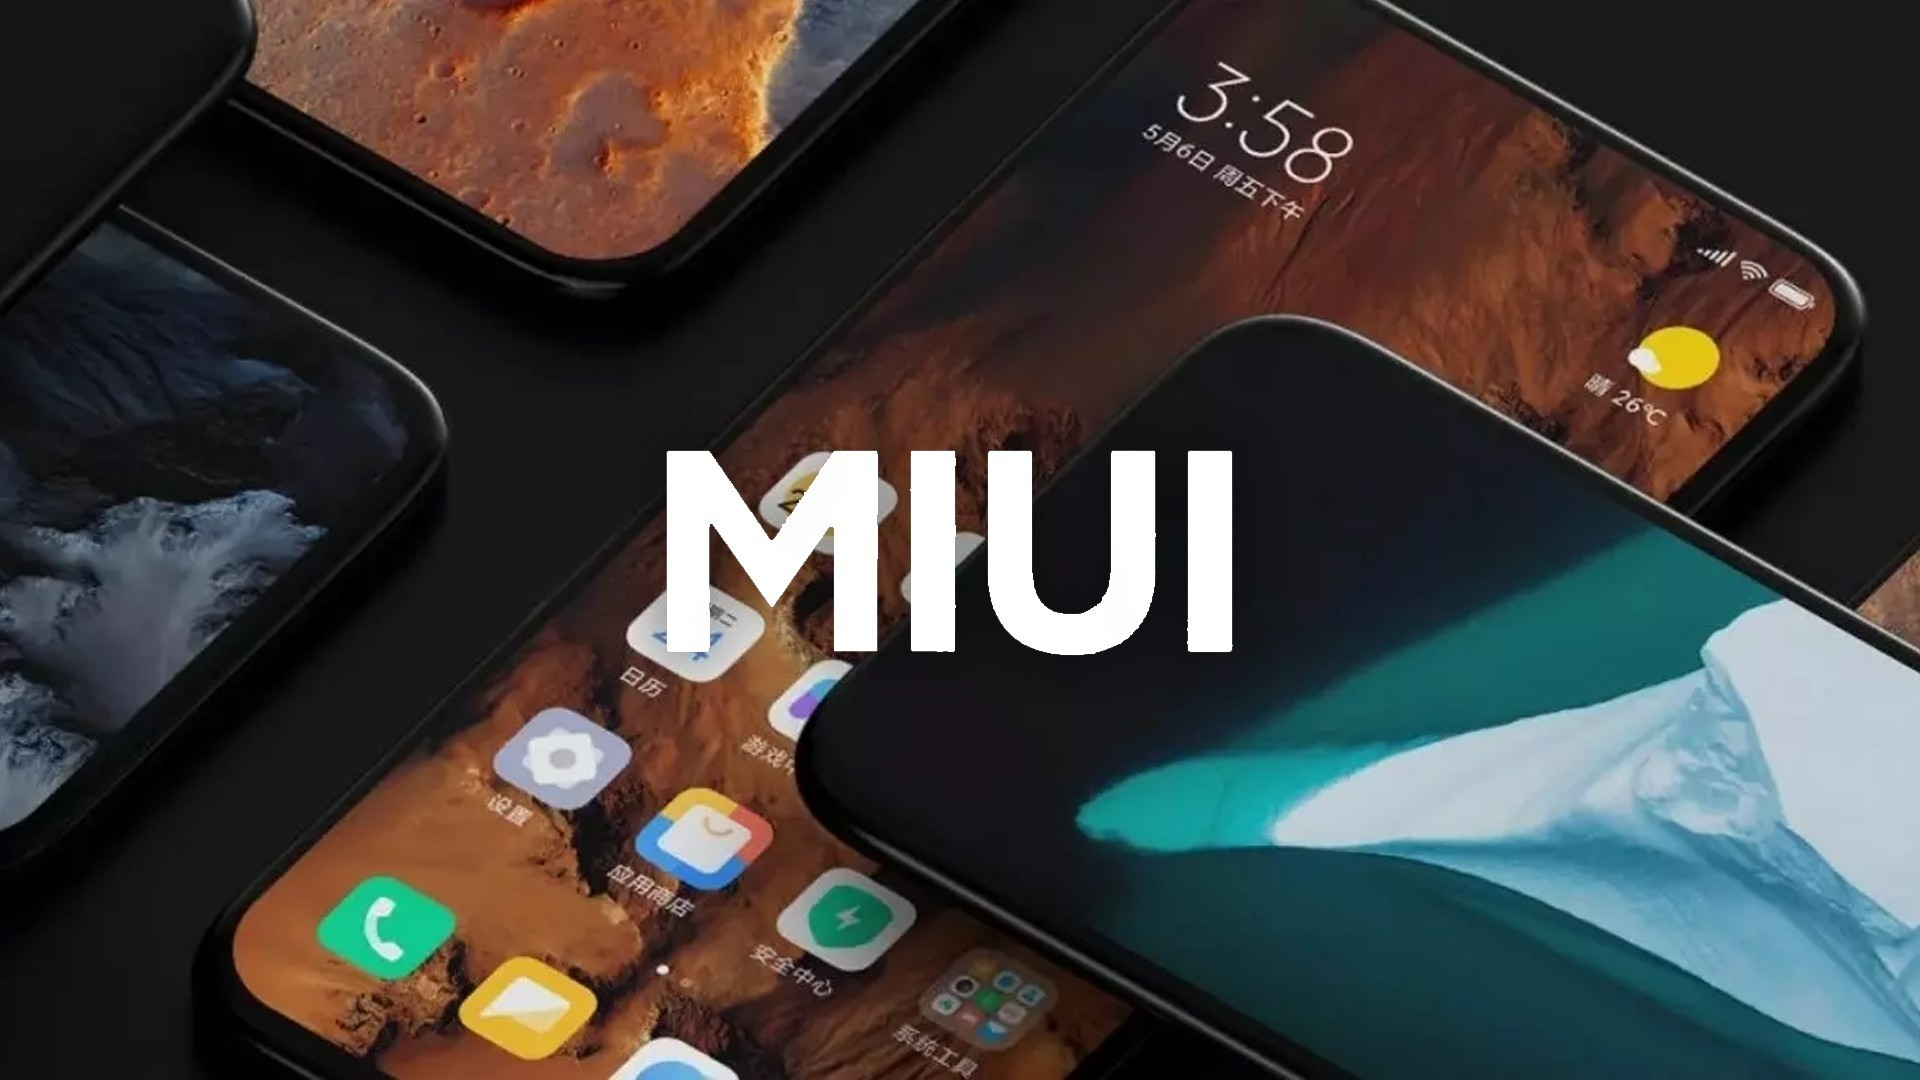 MIUI 14 will have fewer pre-installed apps and should focus on performance, says executive
